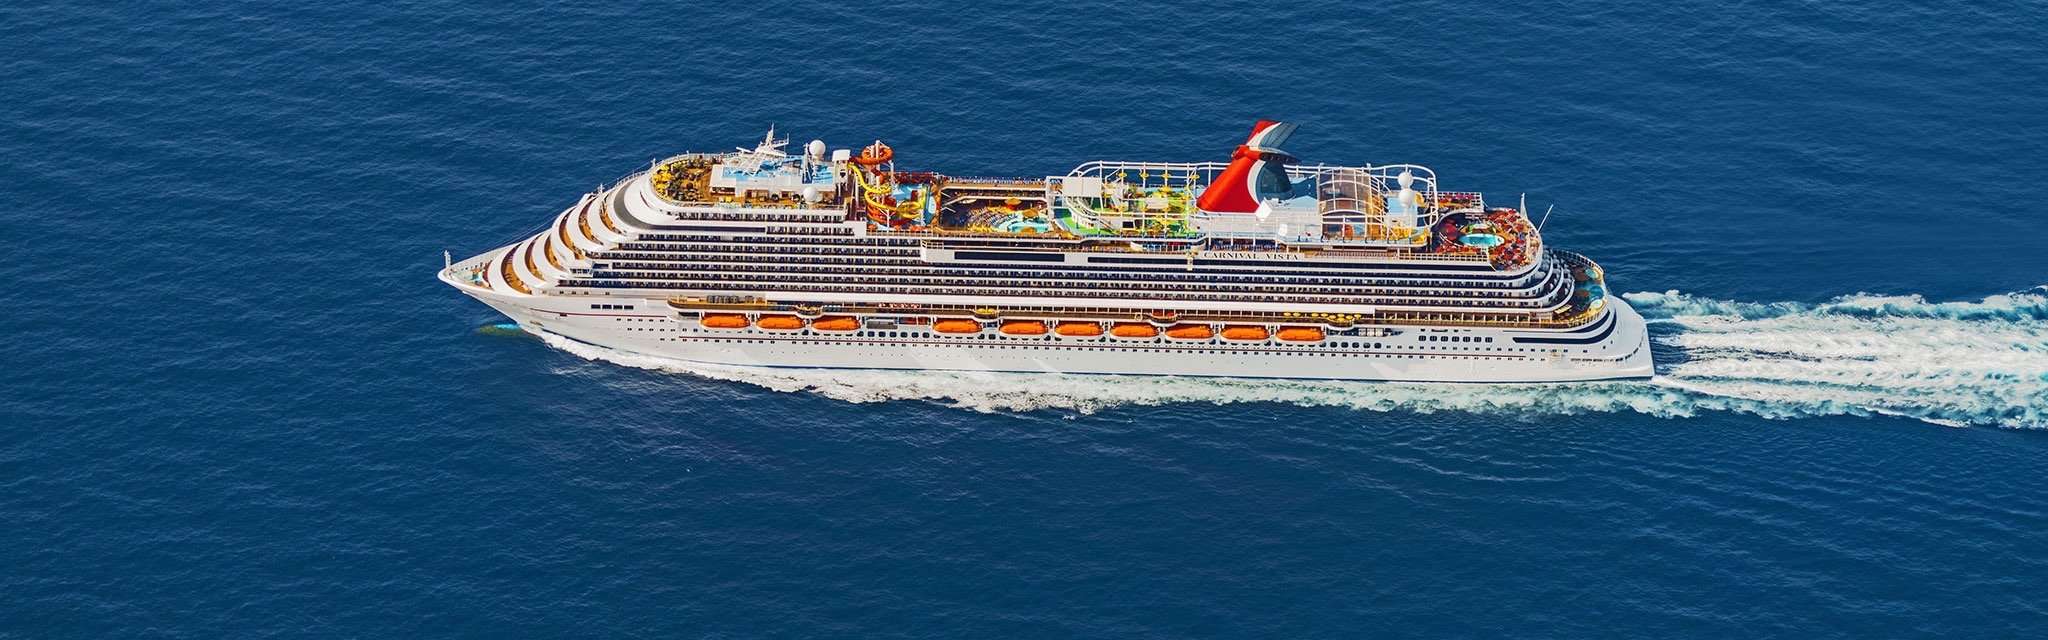 Boat Yacht Rental: Carnival Cruise Line Official Website